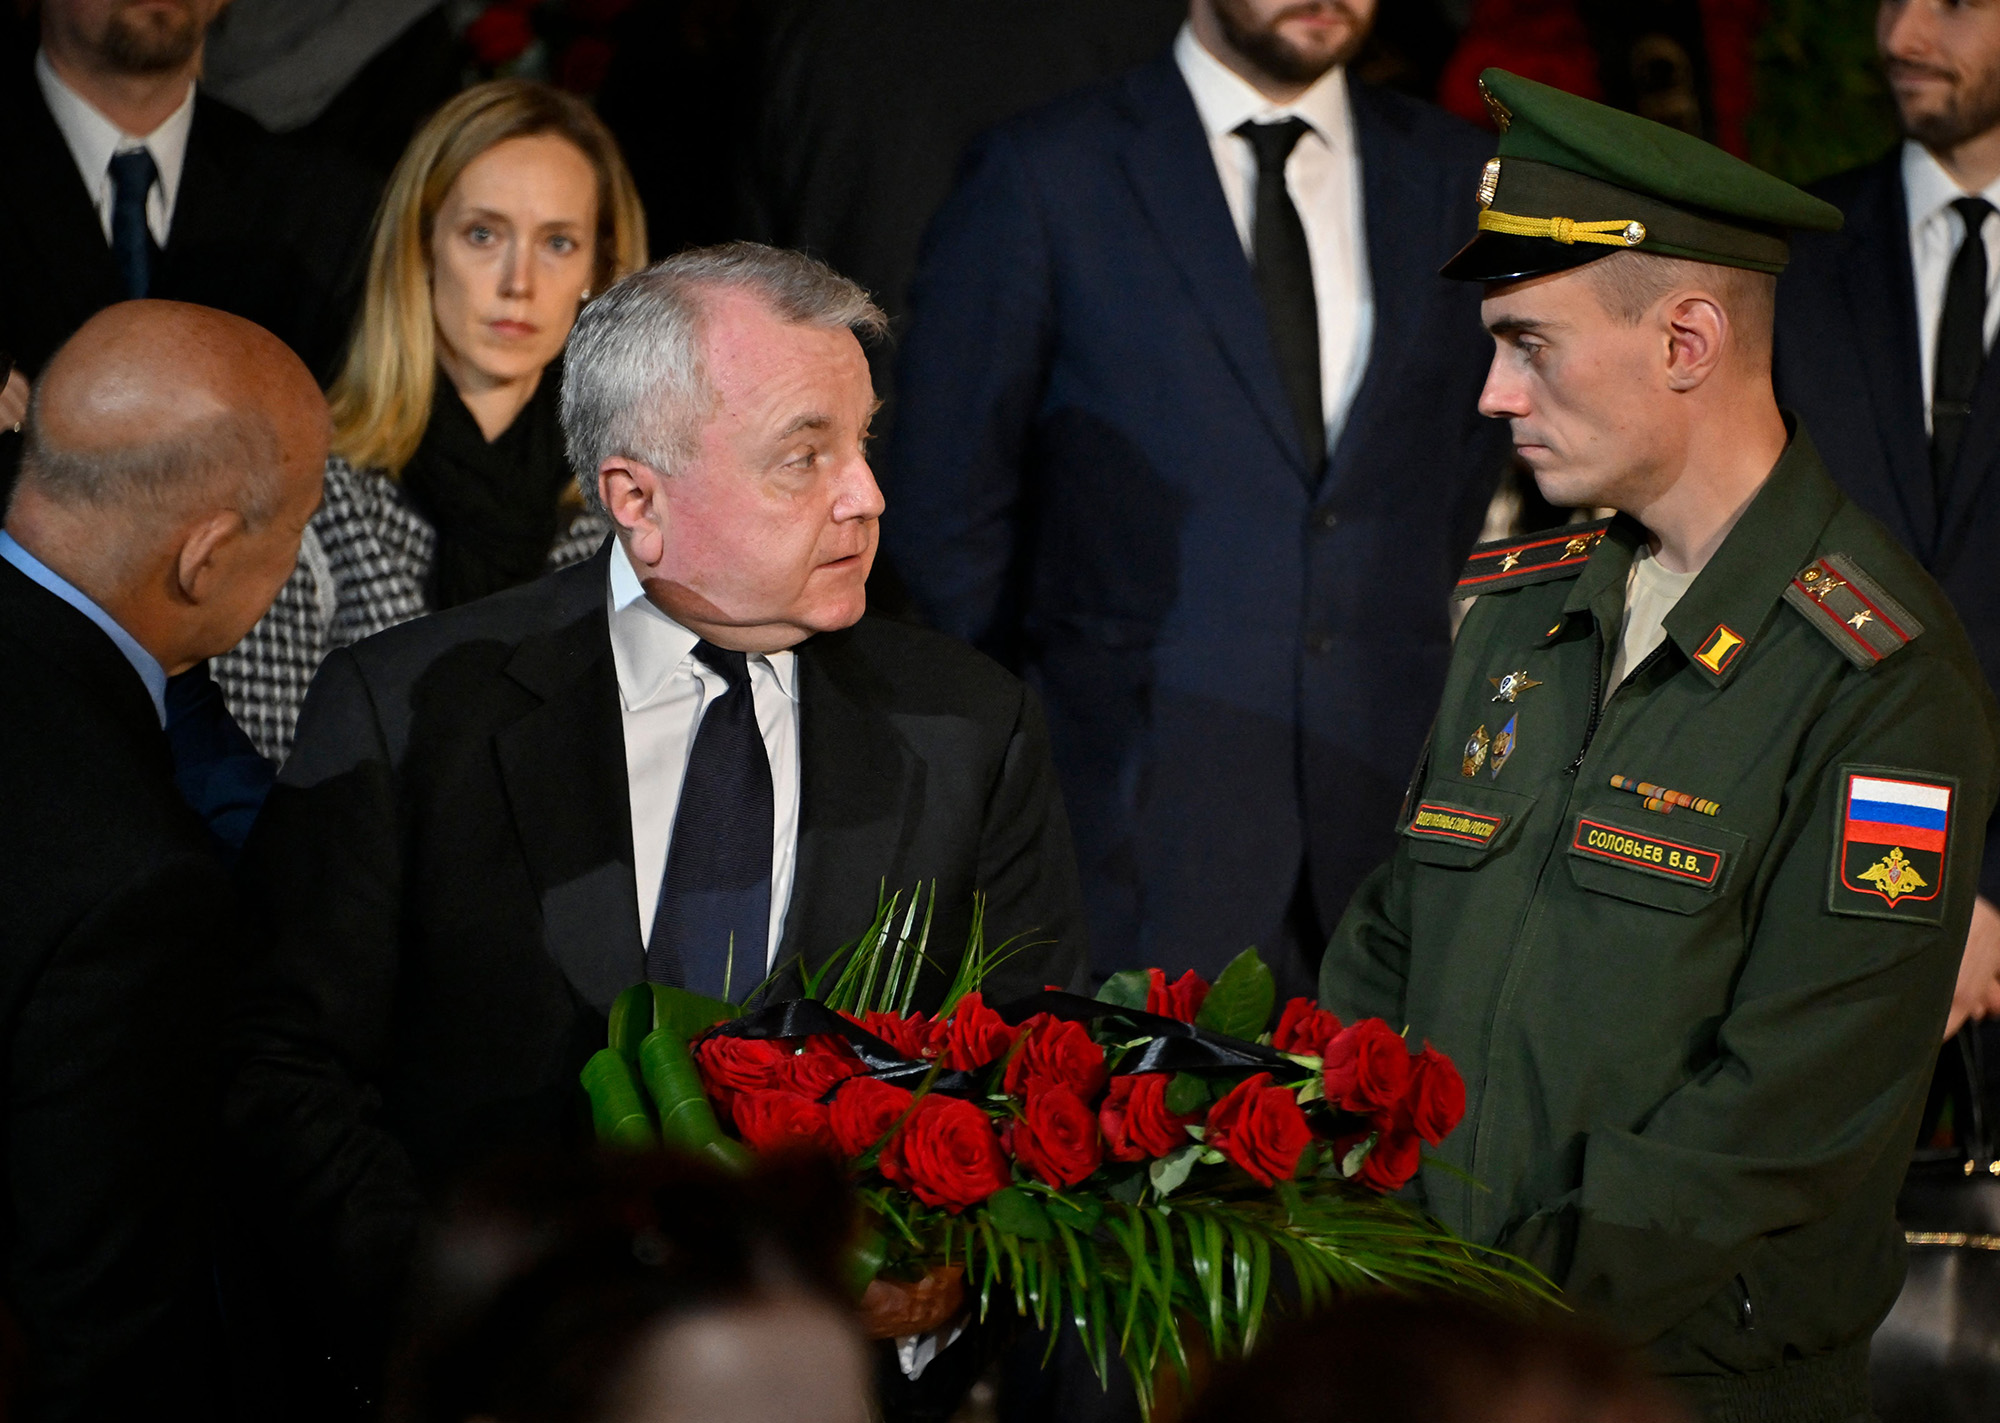 US ambassador to Russia John Joseph Sullivan, center left, attends a memorial service for Mikhail Gorbachev at the Column Hall of the House of Unions in Moscow, Russia, on September 3.